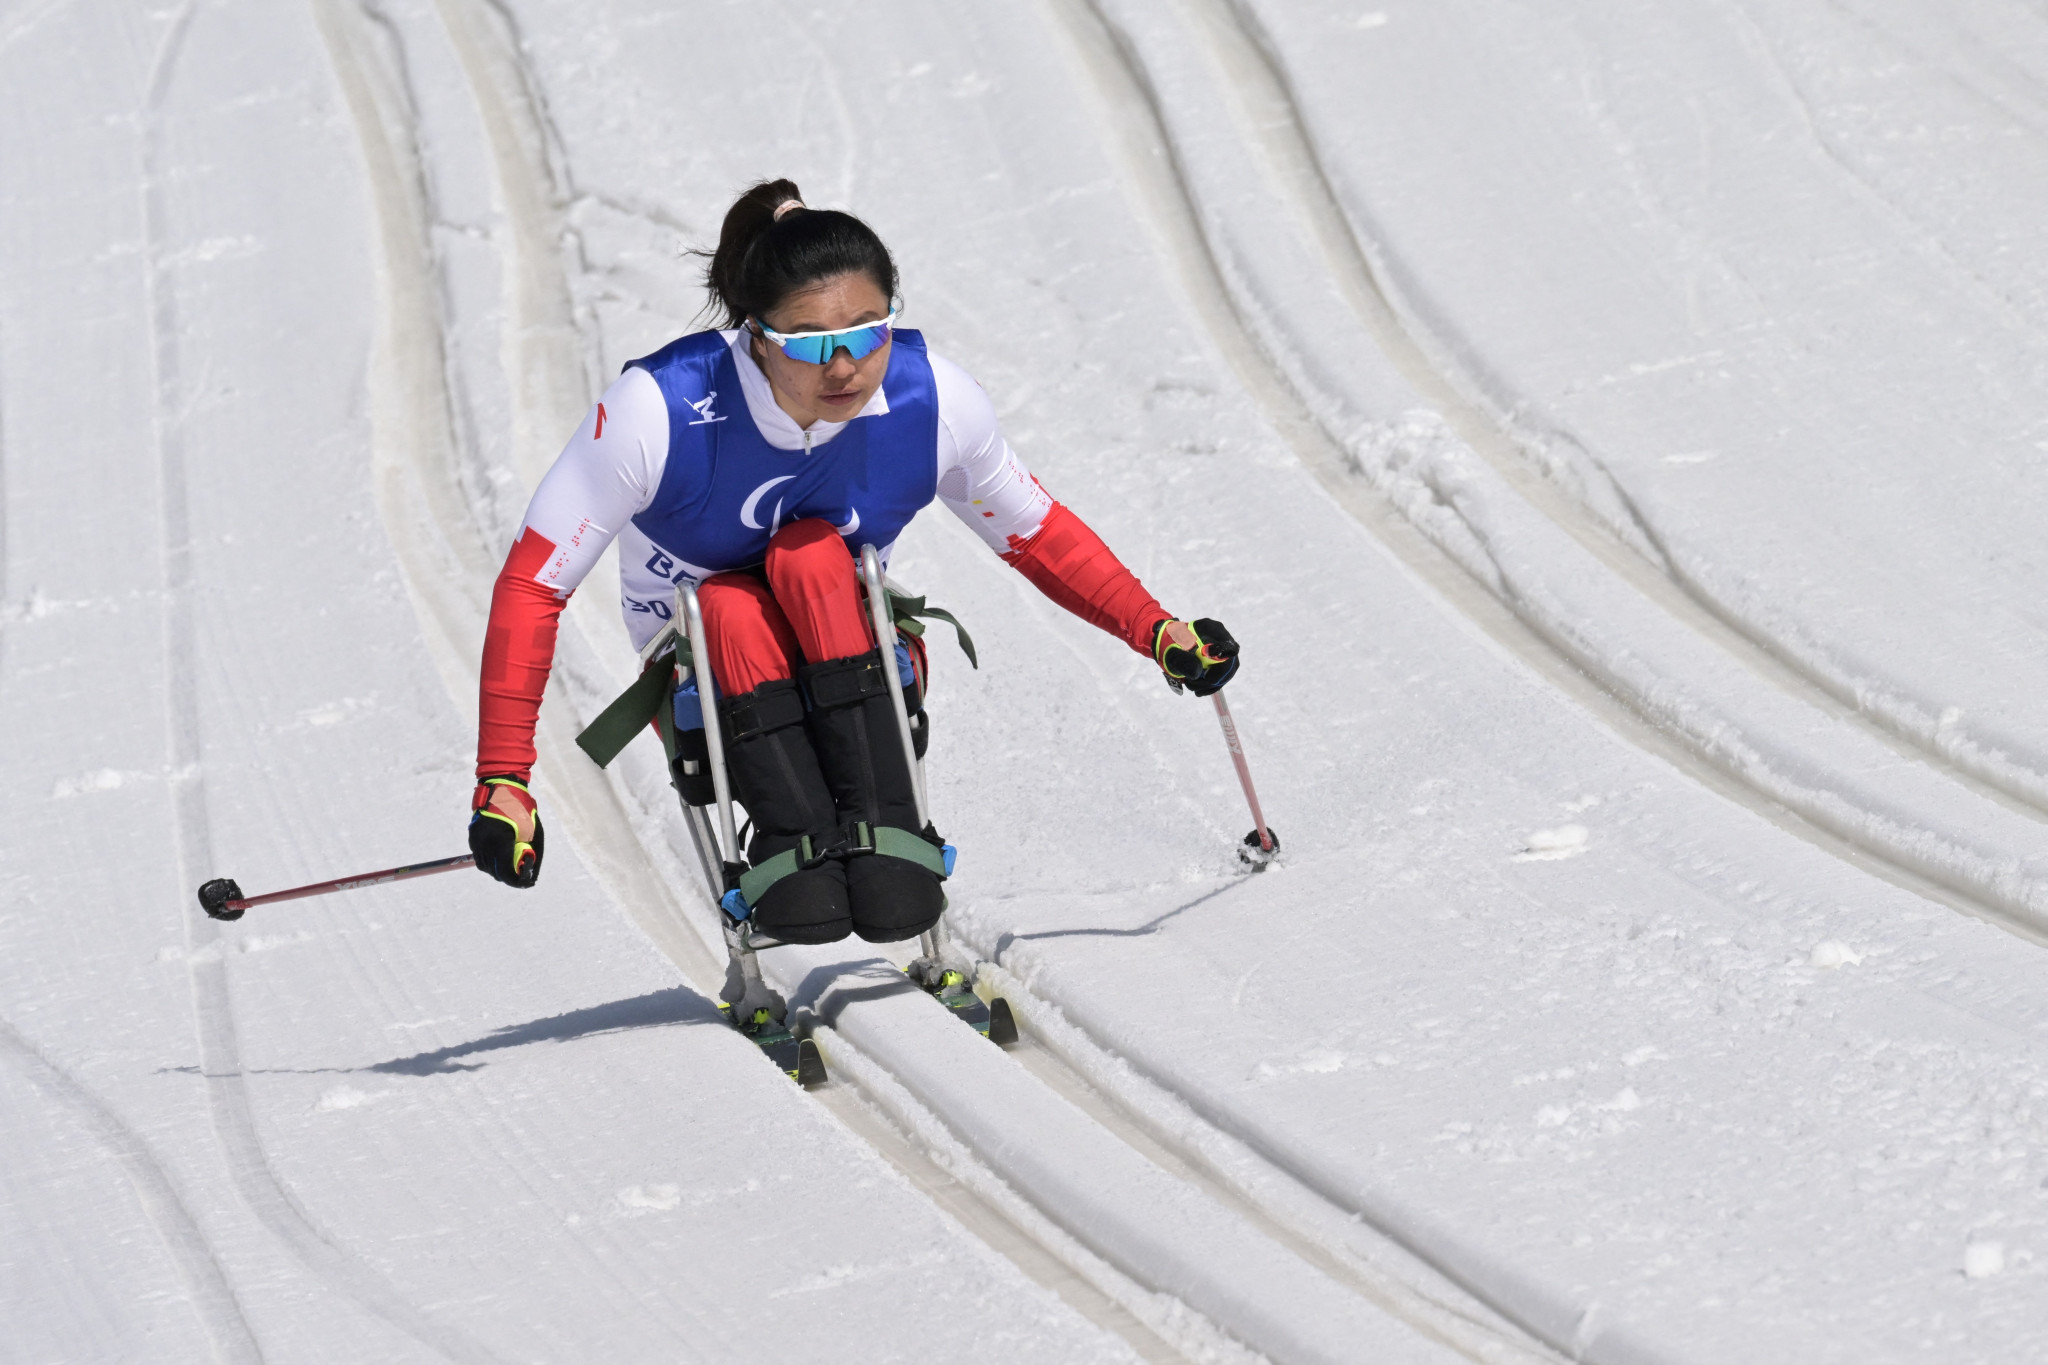 Para cross-country skiing is under consideration by Turin 2025 organisers as they look to add a Para sport discipline ©Getty Images